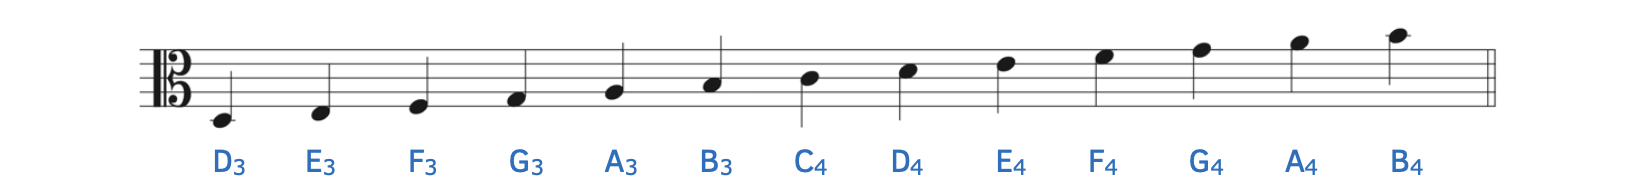 Pitches in the alto clef with octave designations. The first note show is a ledger line below the staff. In the alto clef, this note is D3. The notes are shown diatonically ascending to B4, which is a ledger line above the staff.